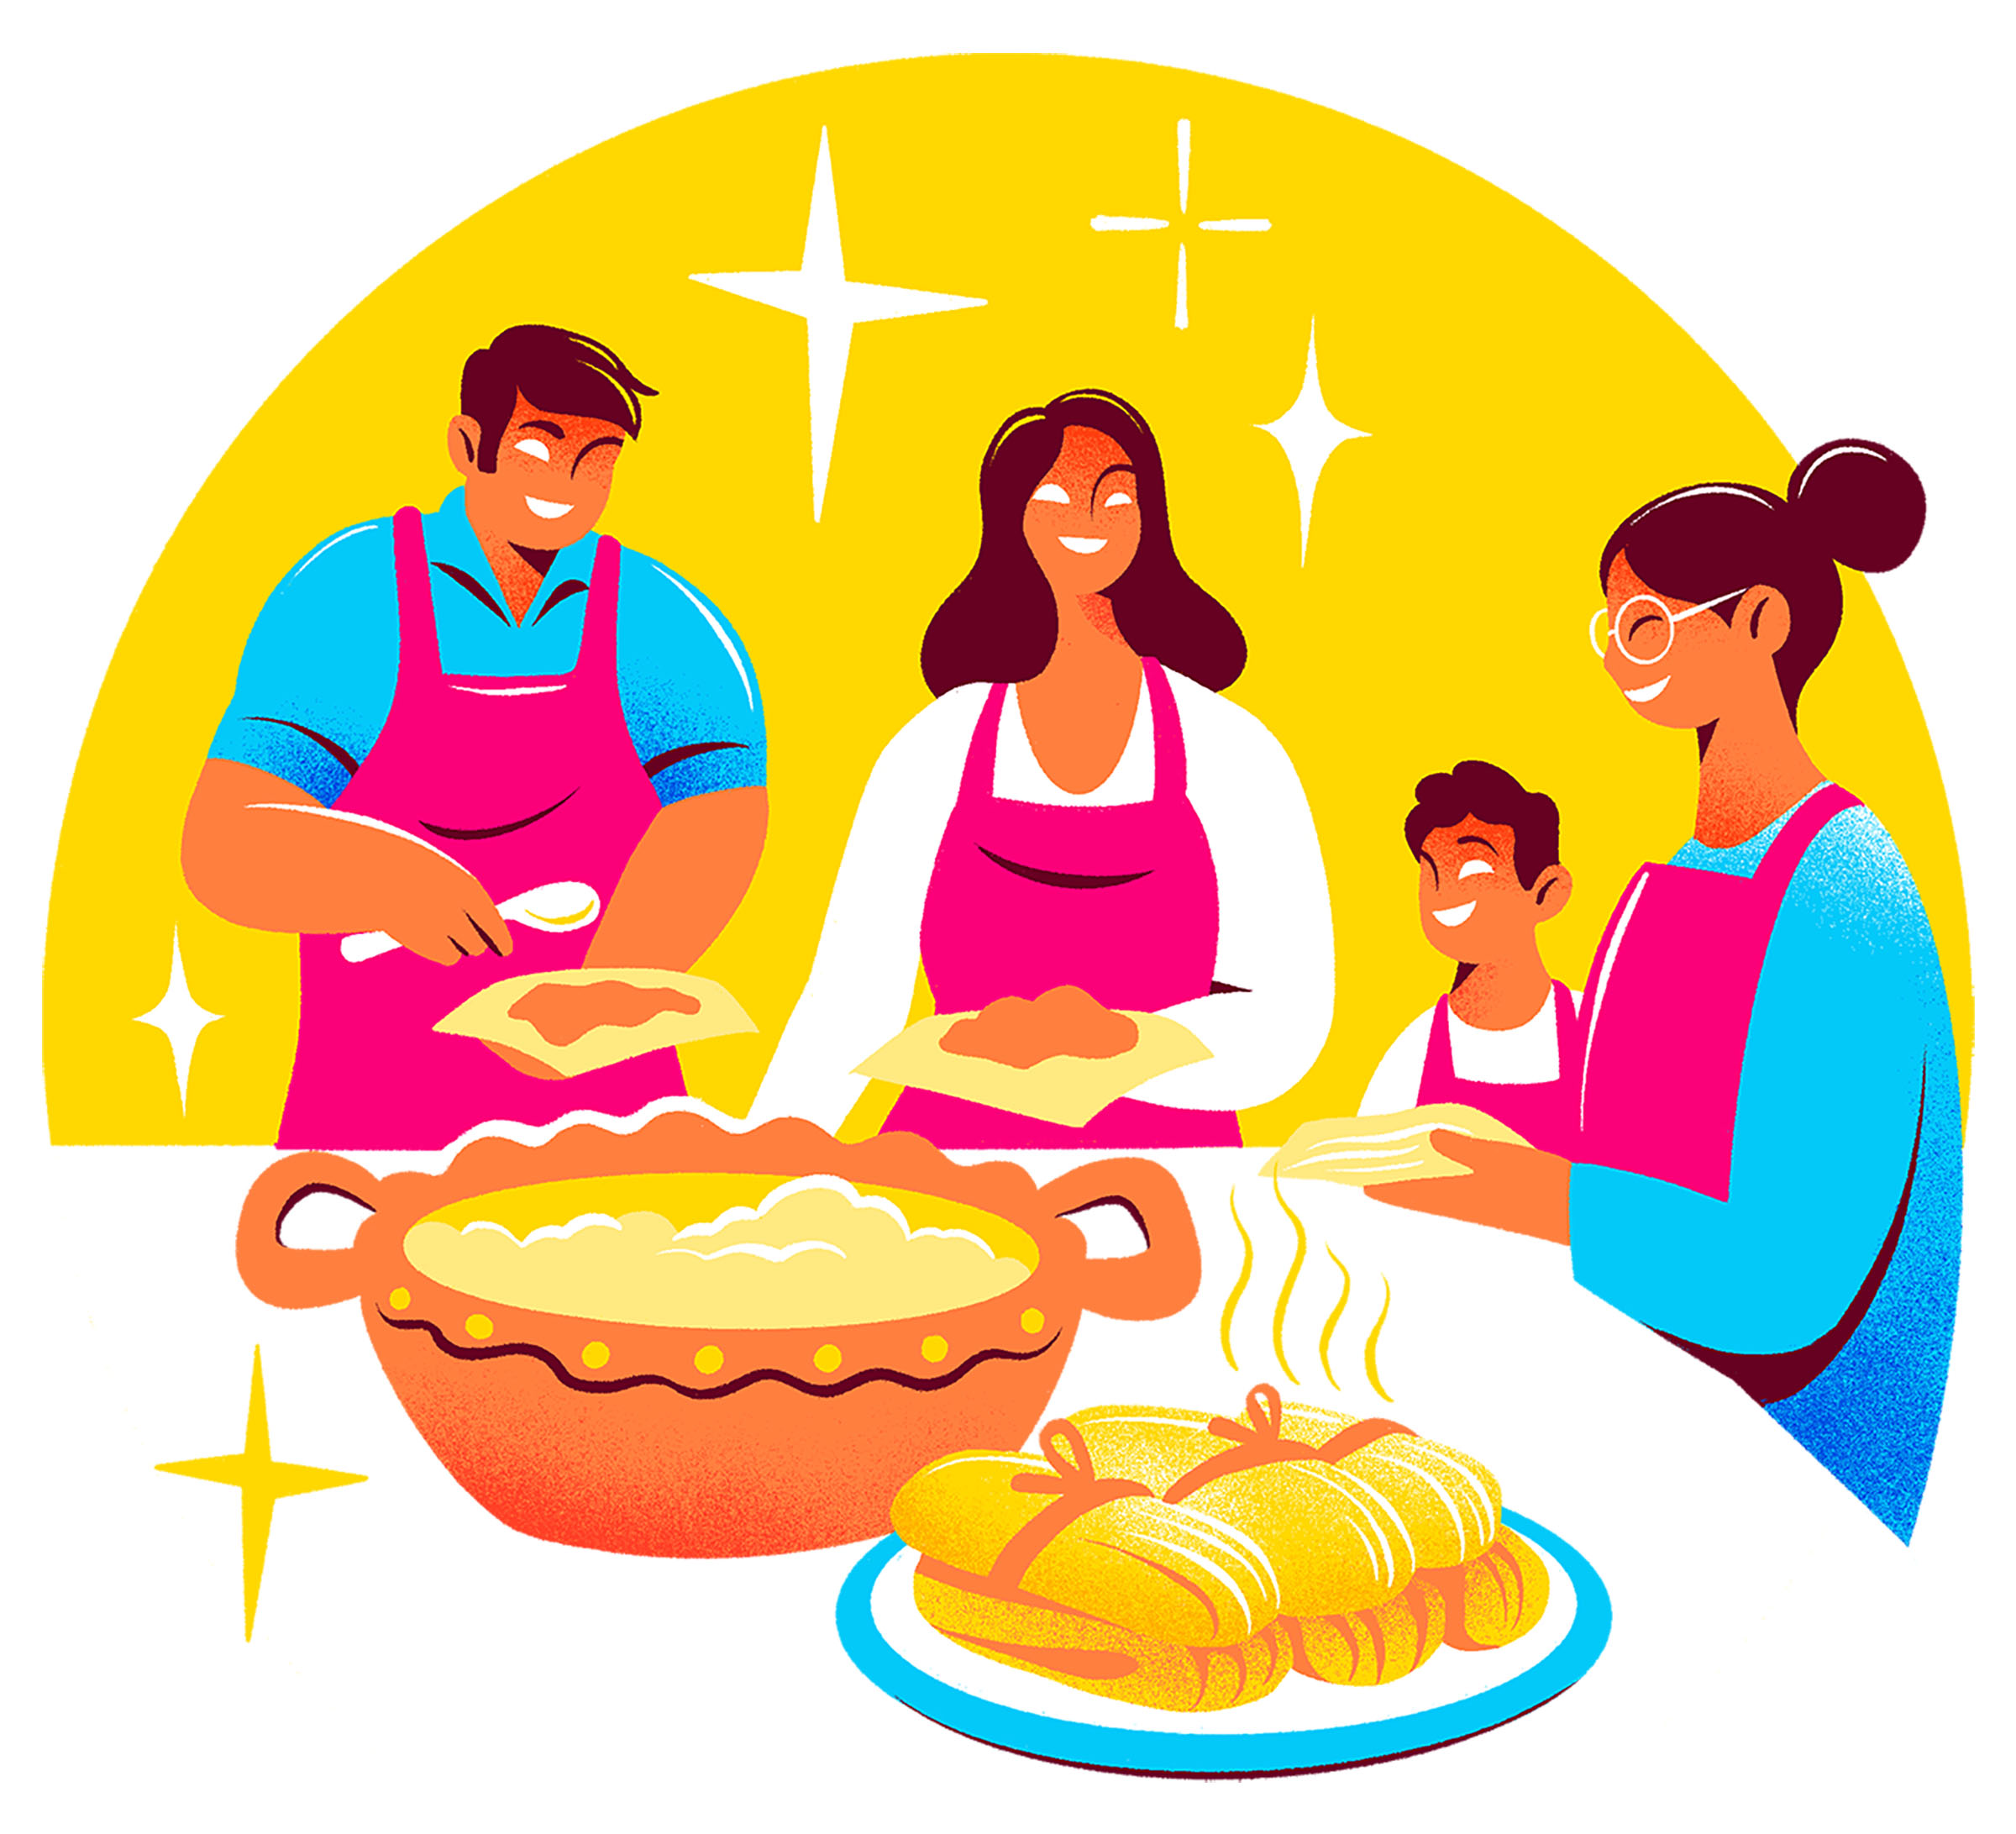 A colorful illustration of a group of people making tamales